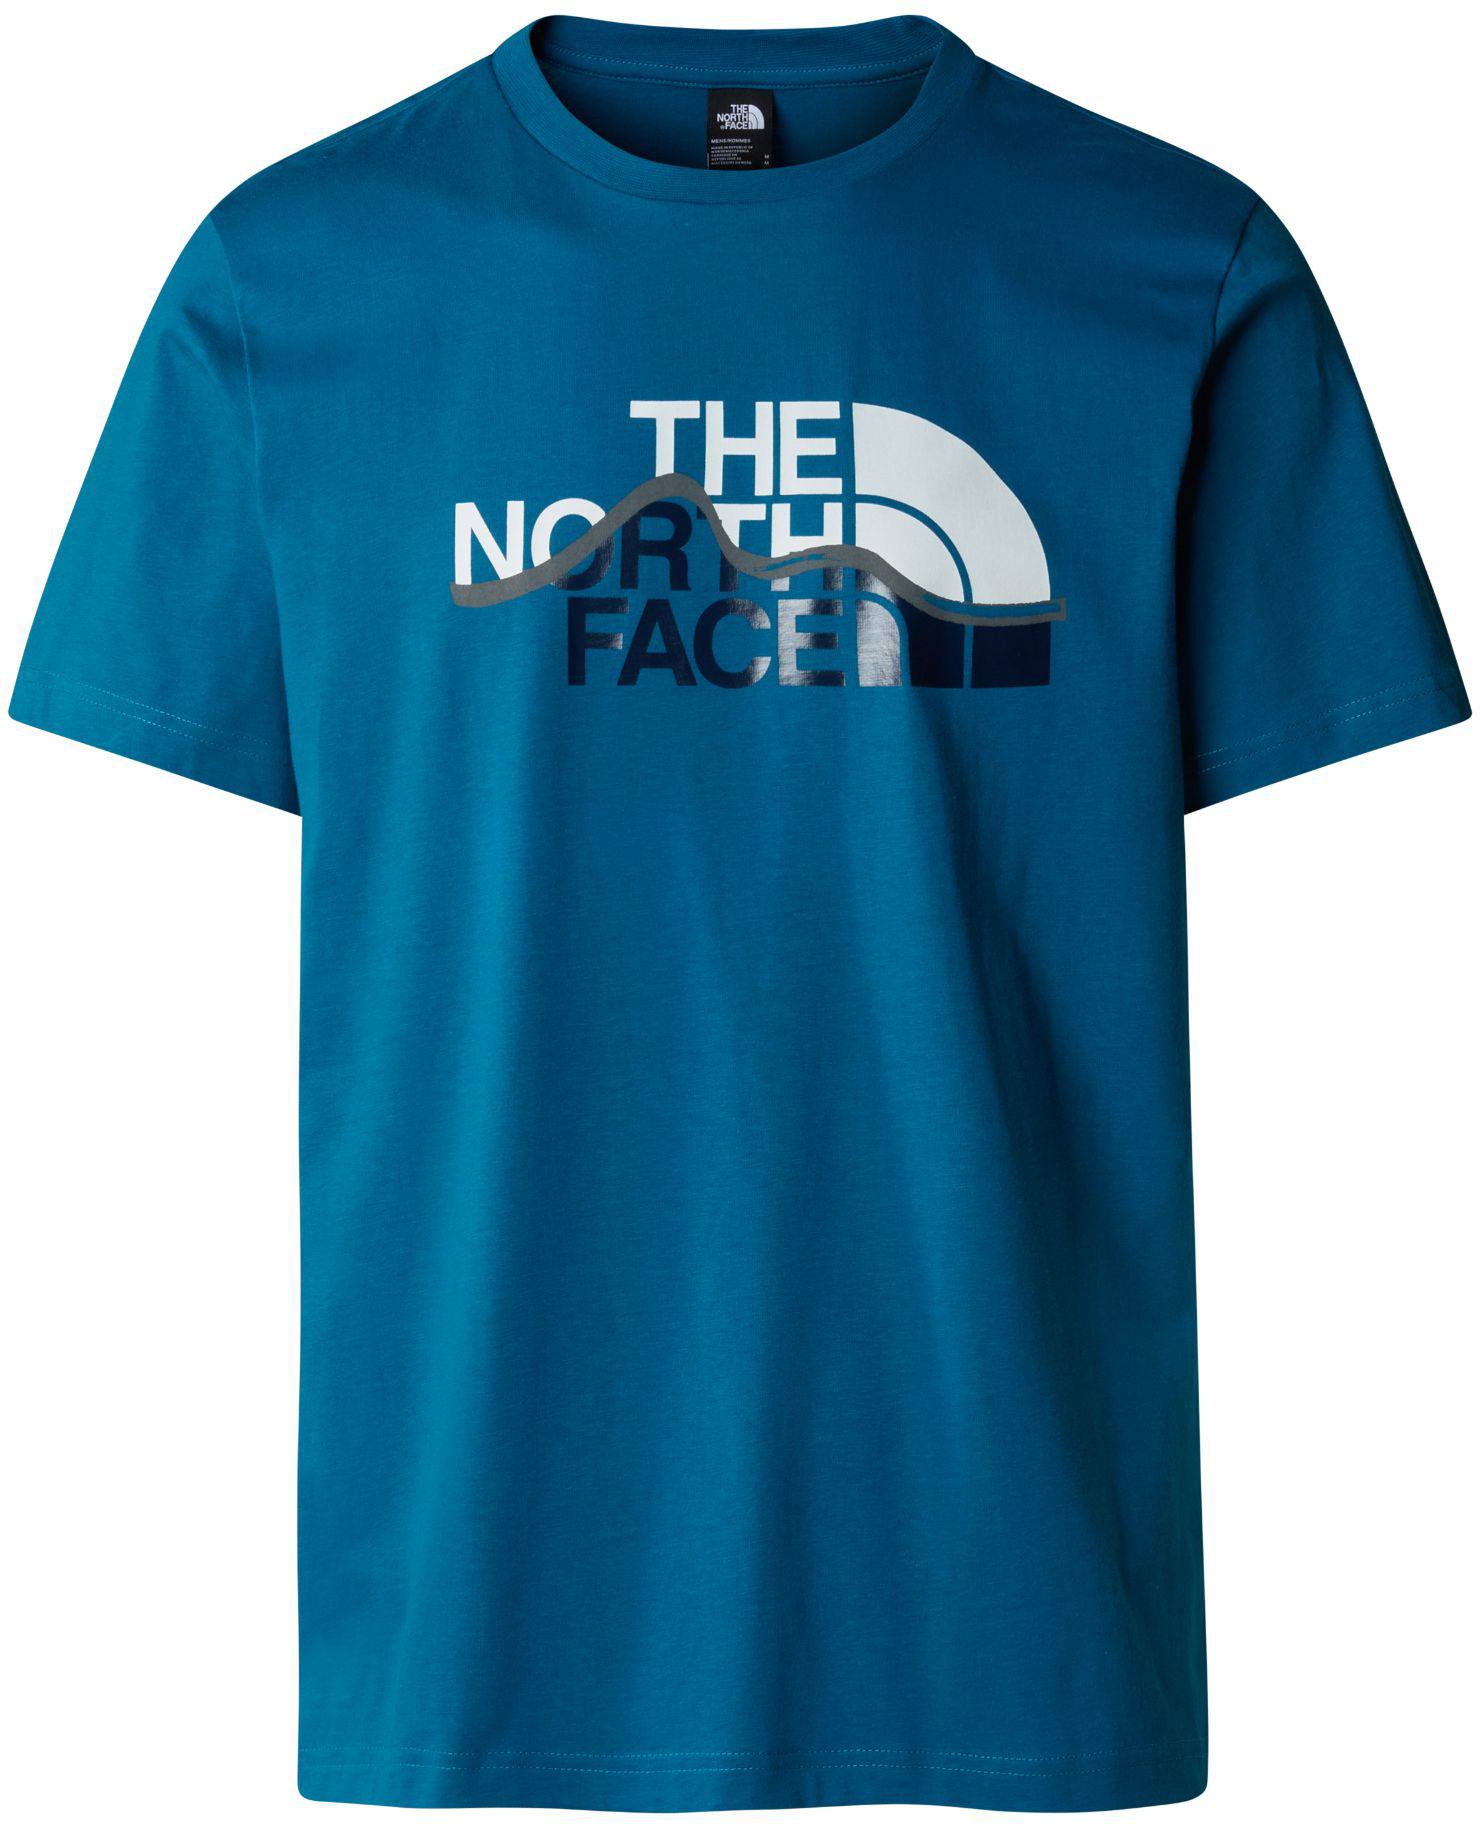 The North Face Men’s Mountain Line Tee